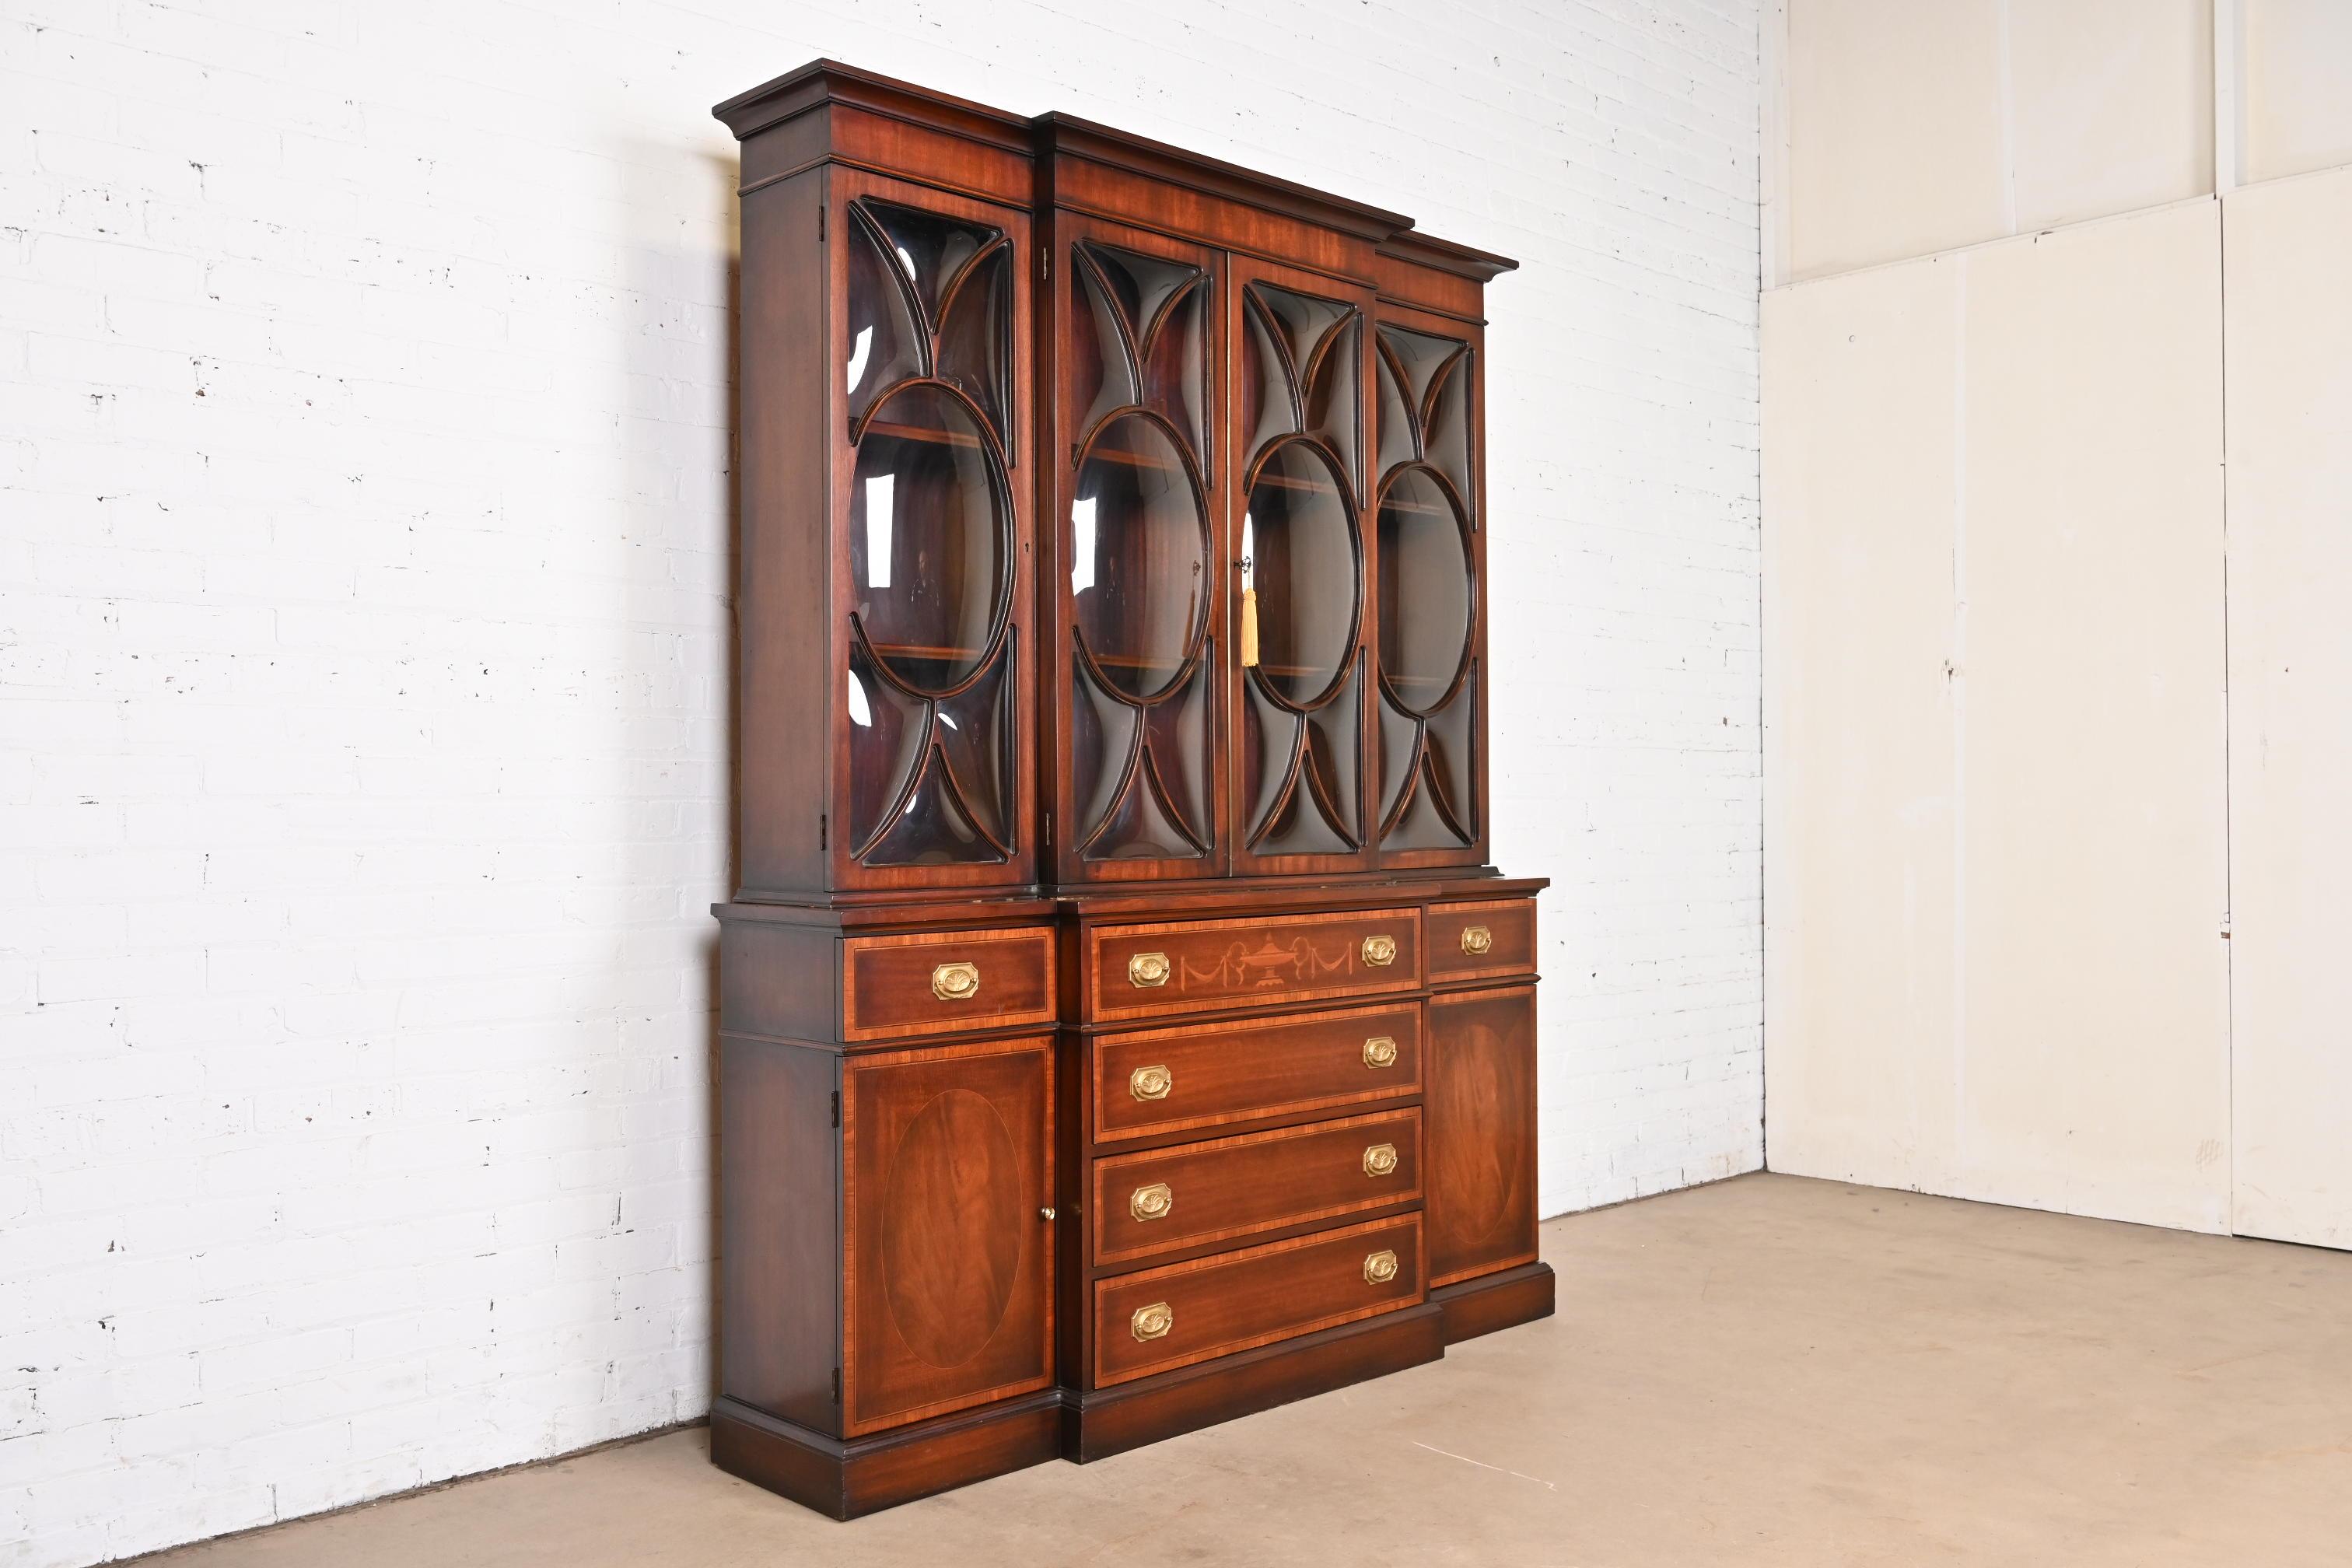 Baker Furniture Style Georgian Inlaid Mahogany Bubble Glass Breakfront Bookcase  In Good Condition For Sale In South Bend, IN